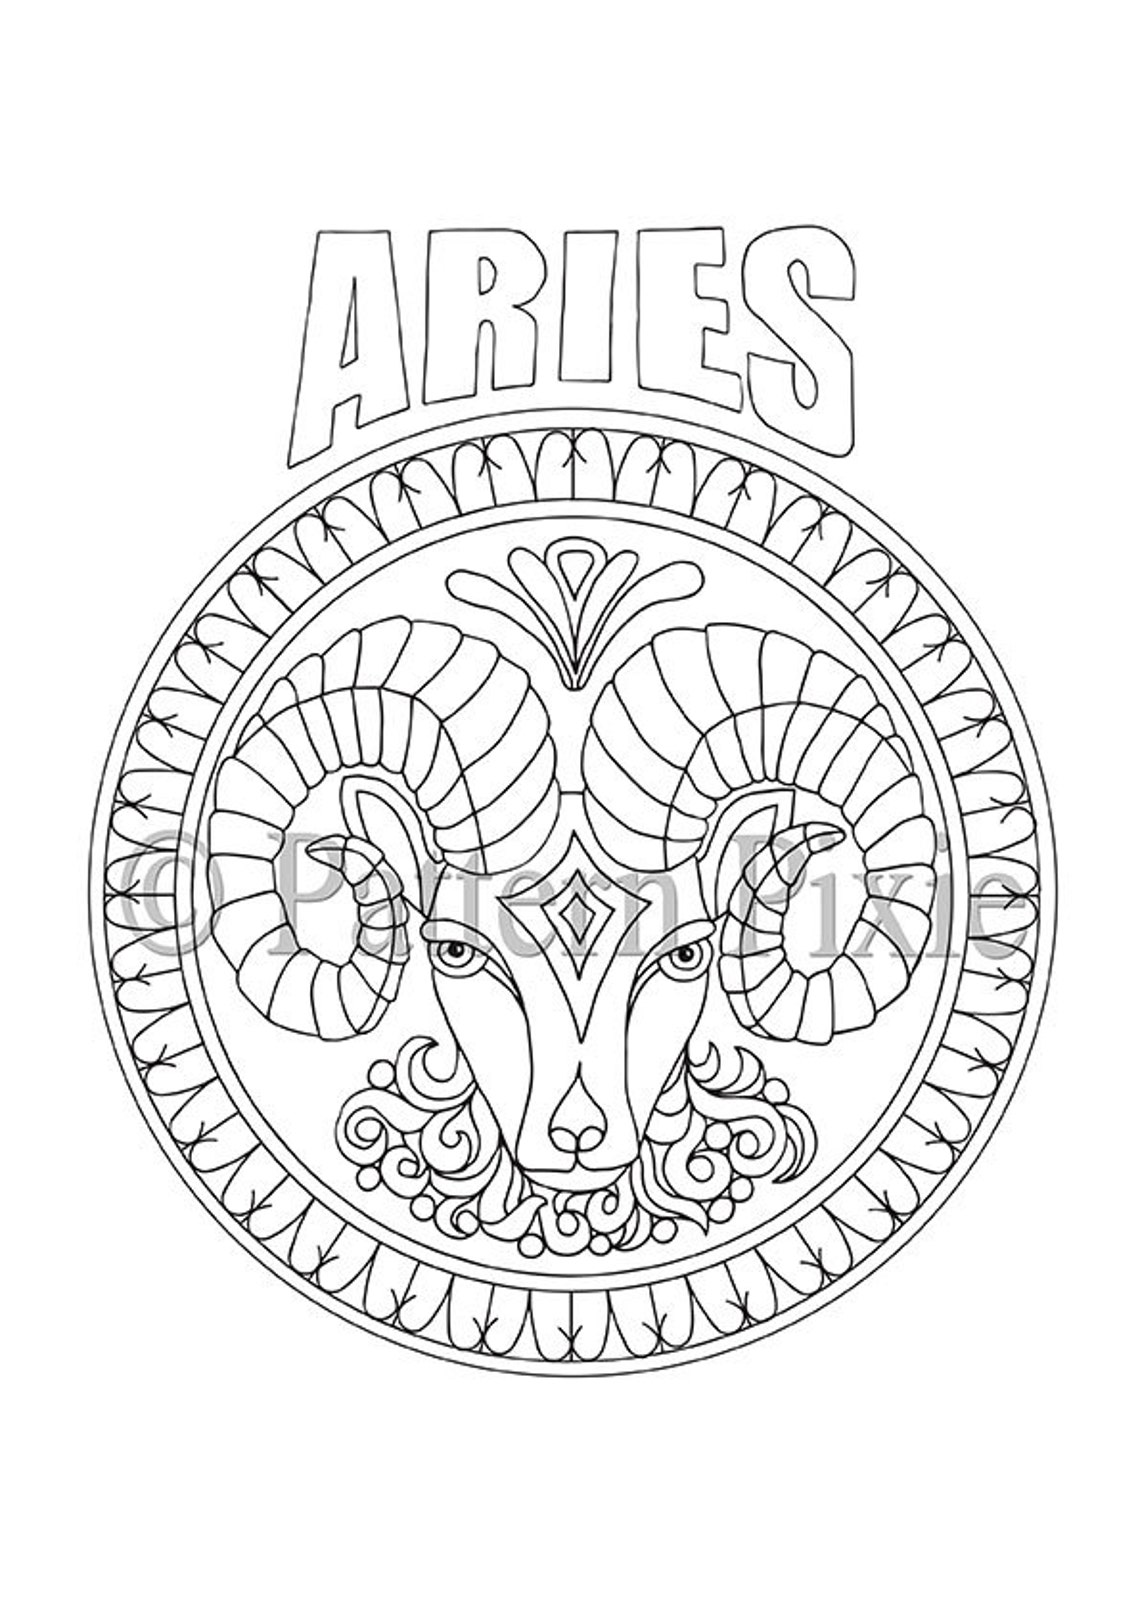 Adult Coloring Page Zodiac Aries | Etsy